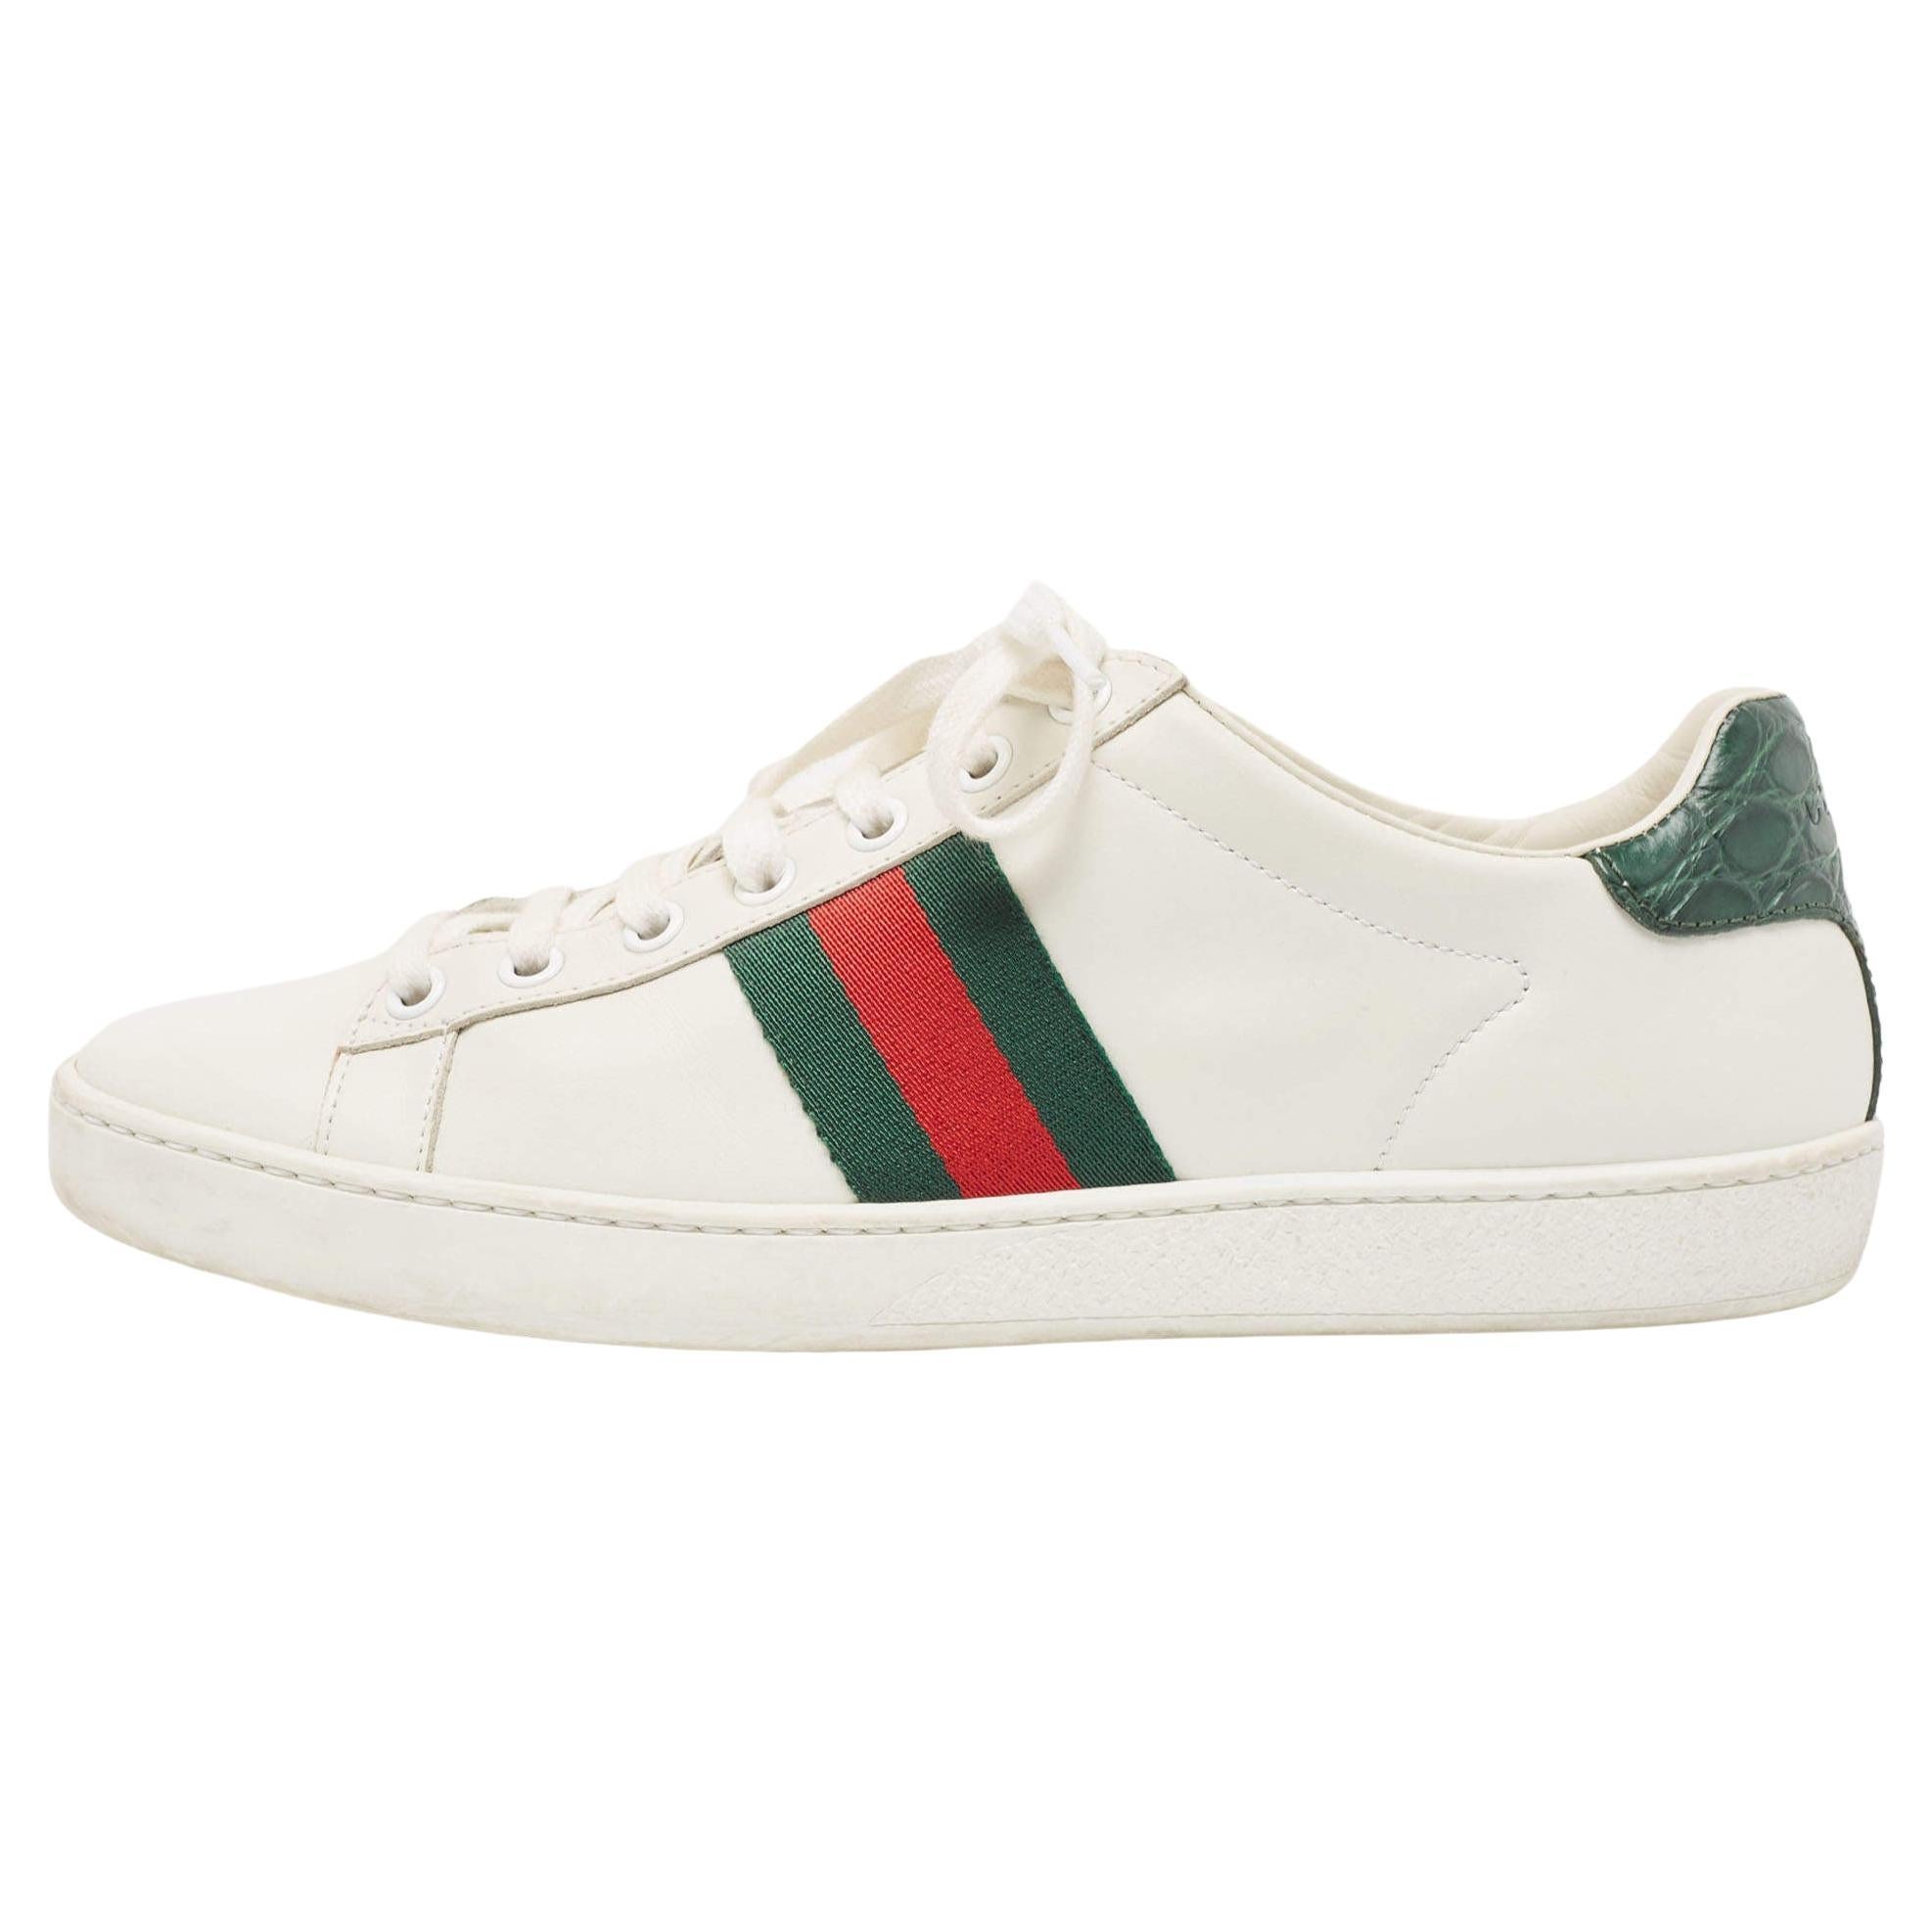 Gucci White/Green Cro Embossed and Leather Ace Sneakers Size 38 For Sale